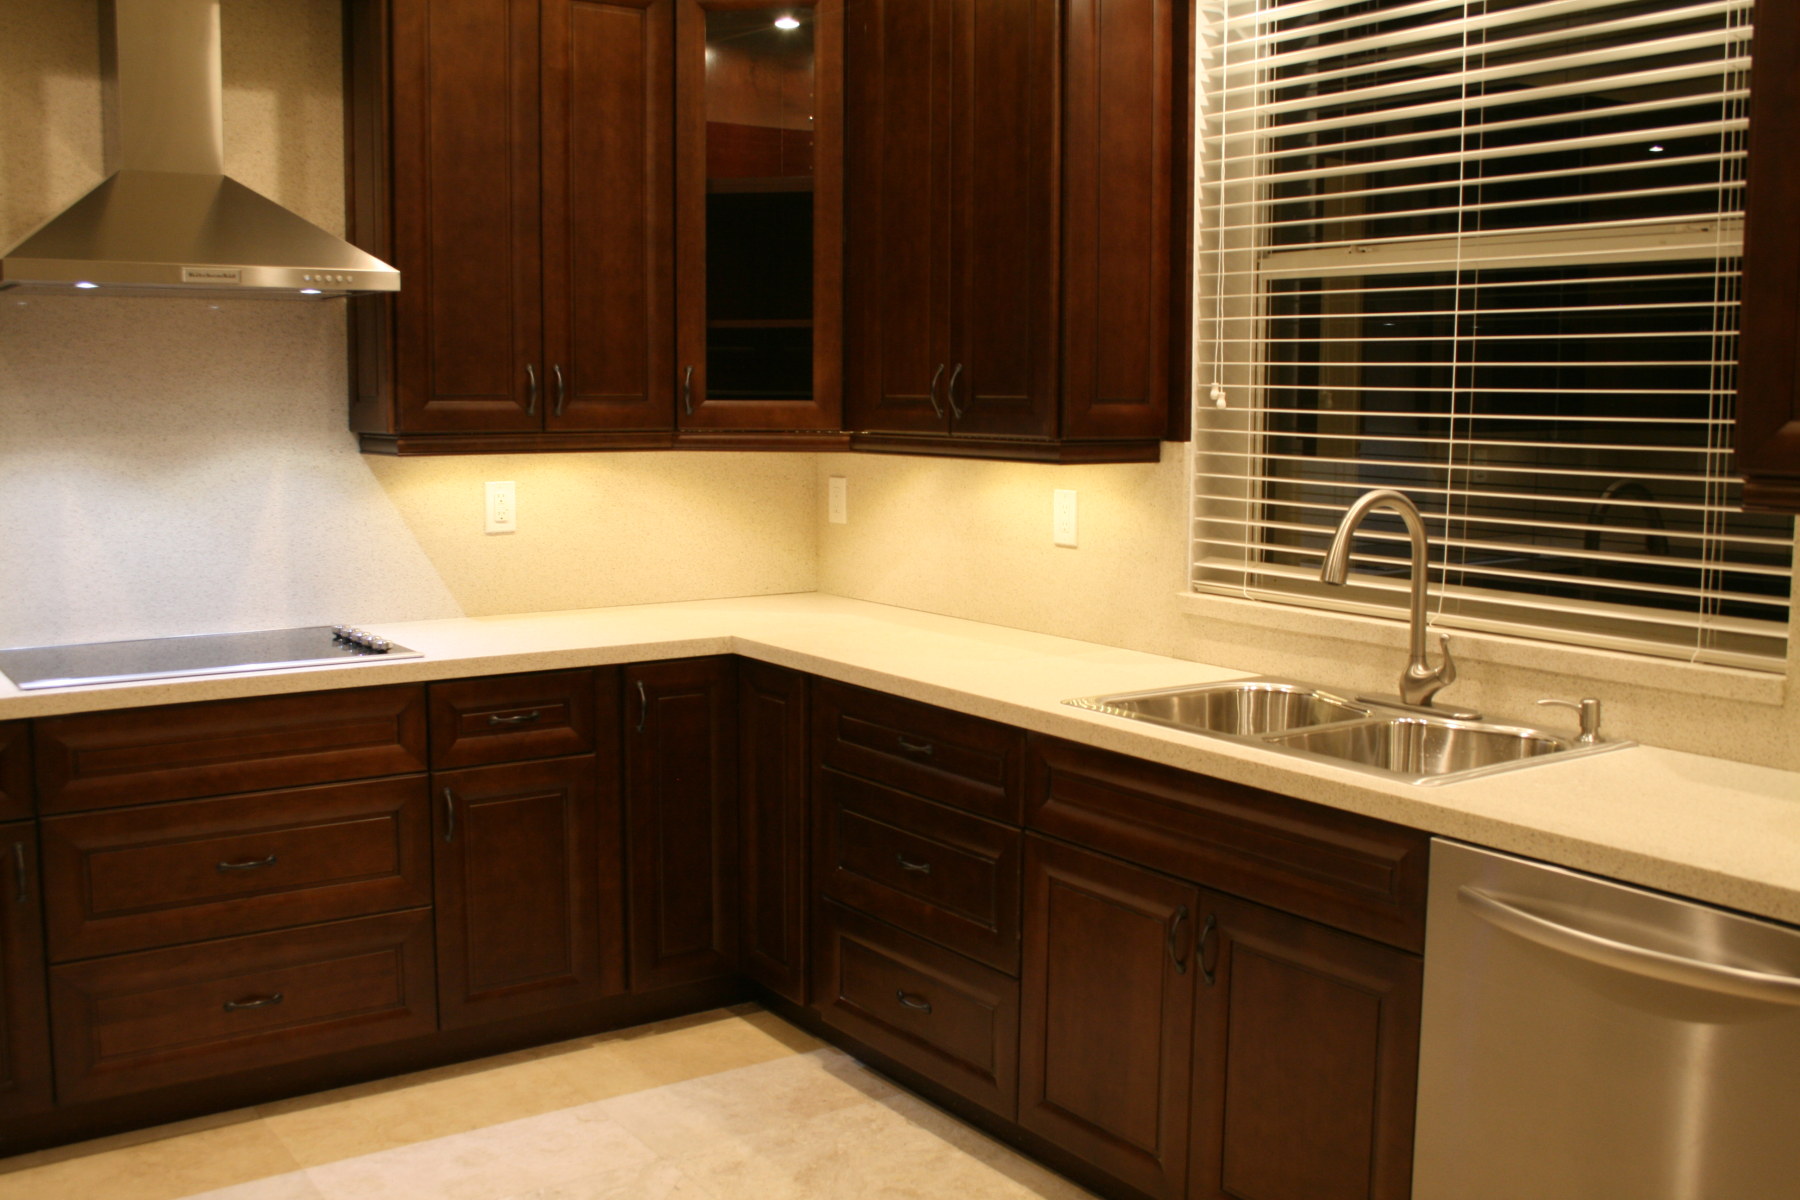 New solid wood kitchen cabinets